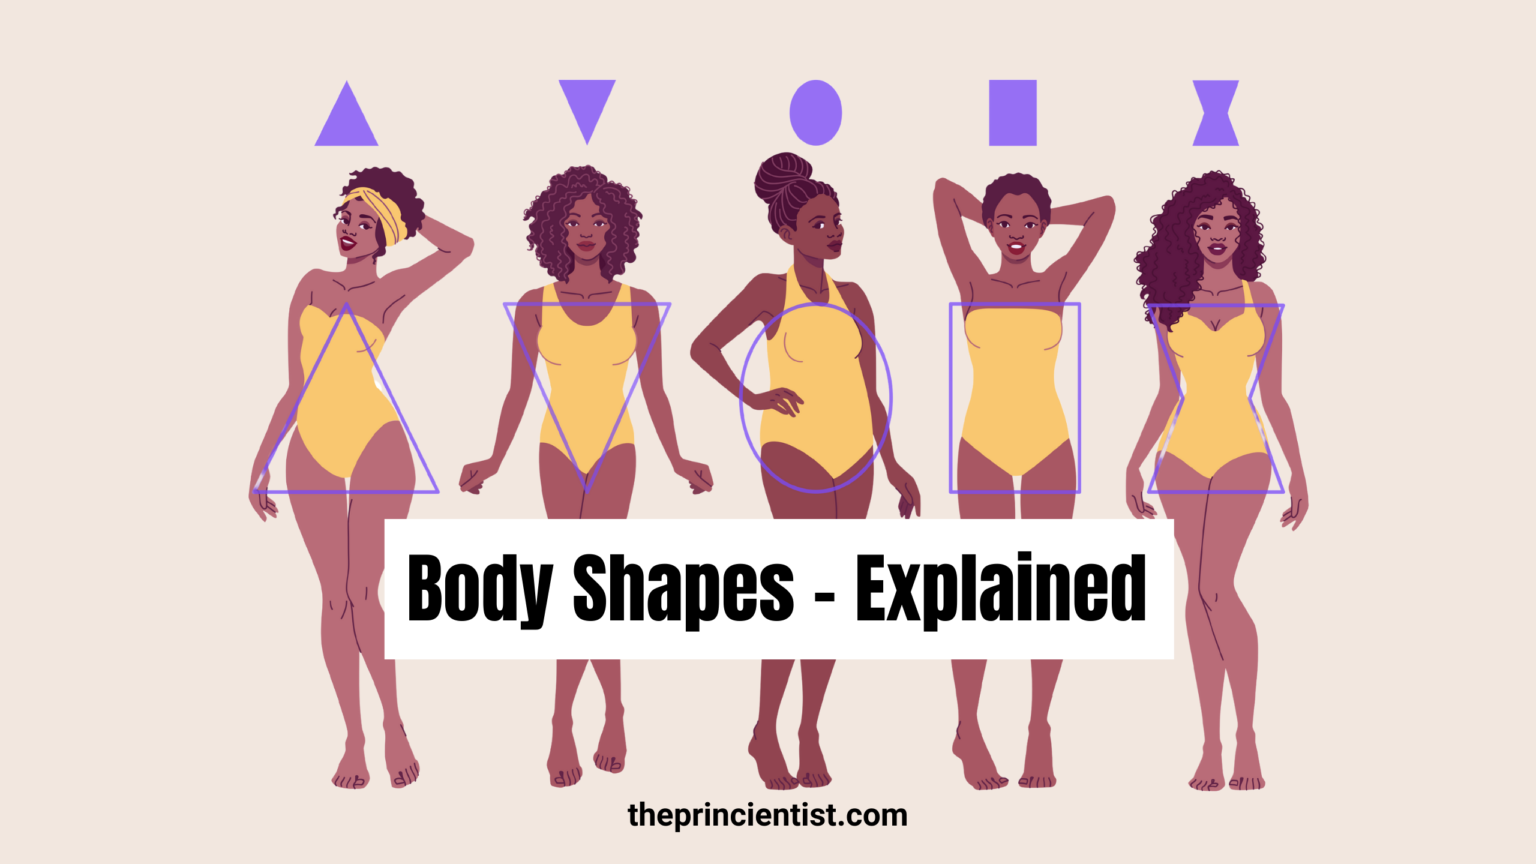 body shapes explained - featured image